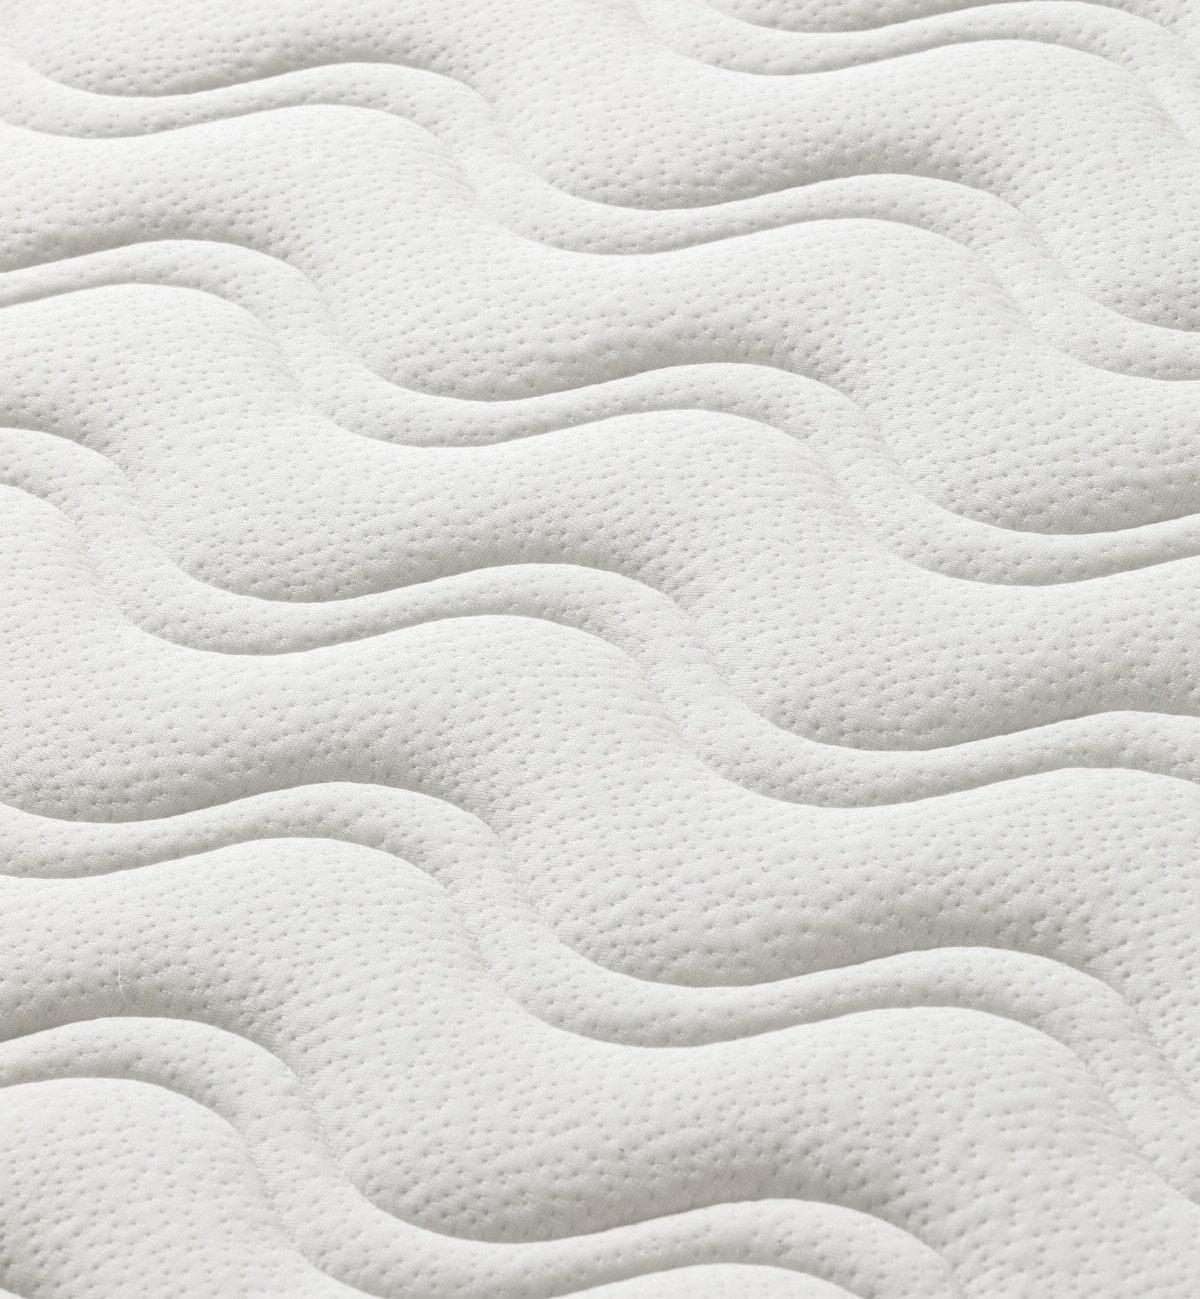 Aloenatura® adult mattress with breathable TENCEL™ cover.